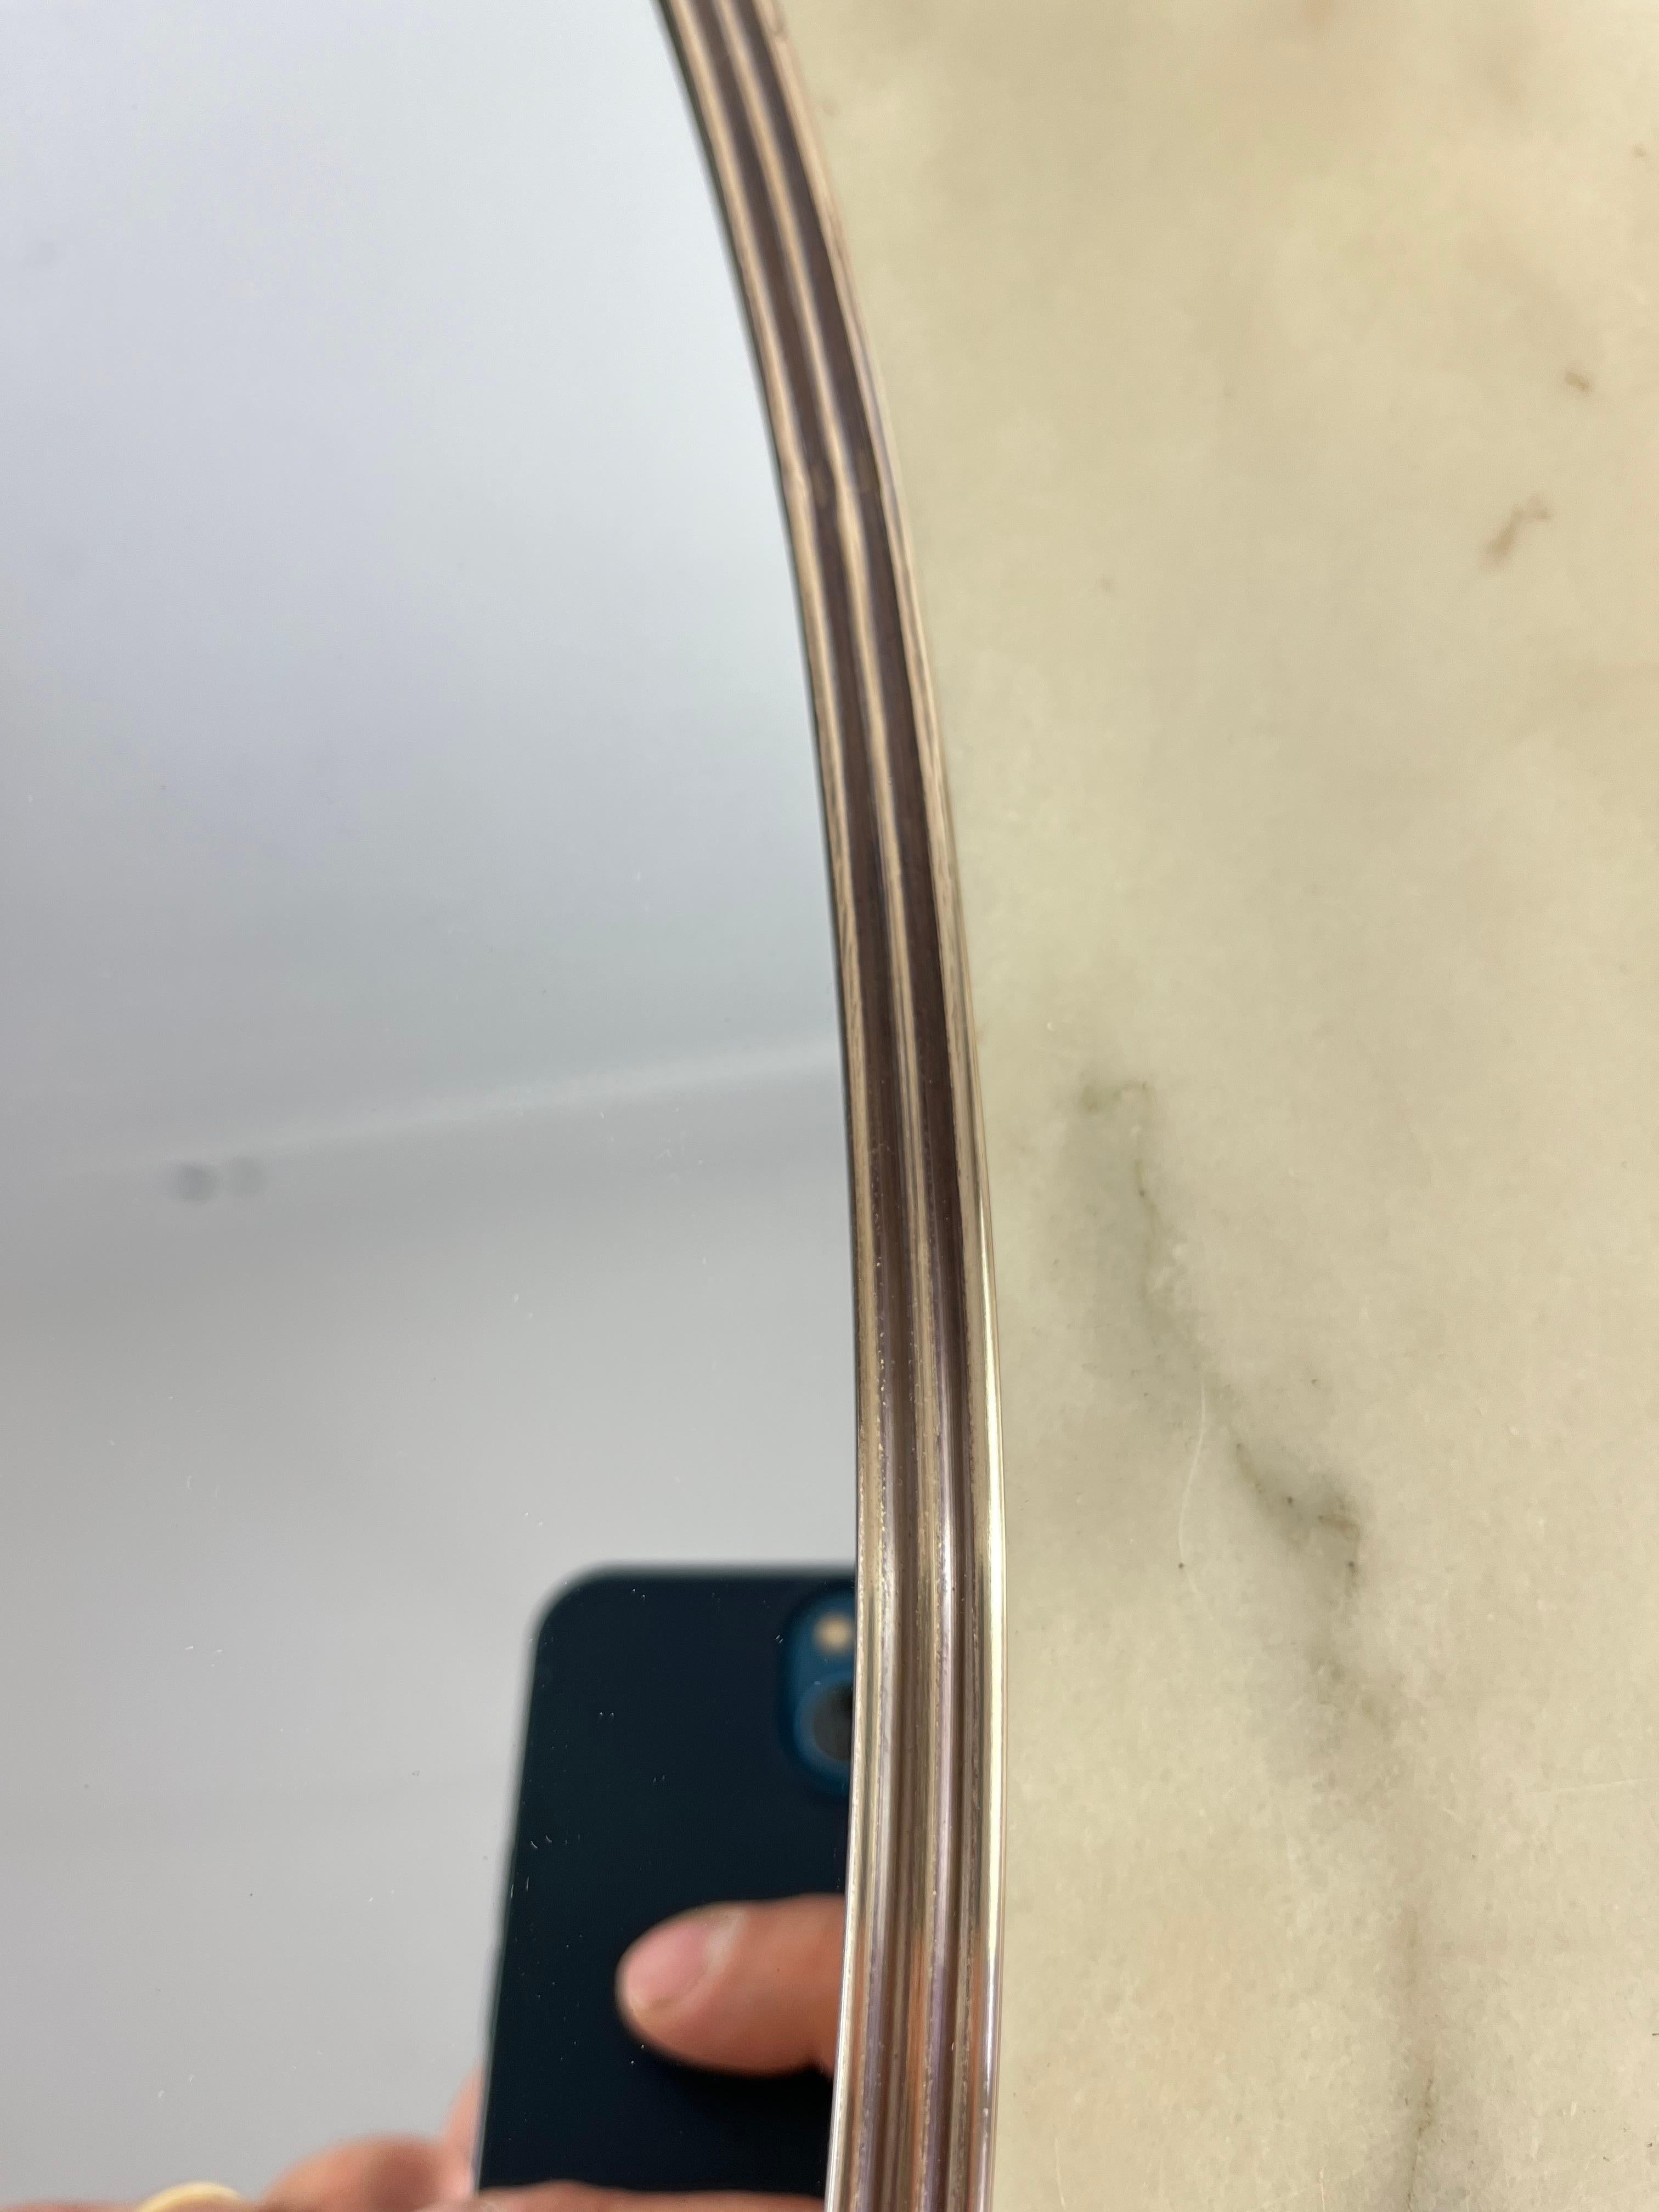 Mid-Century Italian brass mirror, attributed to Gio Ponti, 1960s
Found in a noble apartment, it is intact. Good conditions. Small oxidations on the brass which attest to the authenticity of the object. I have not polished or removed the dust for